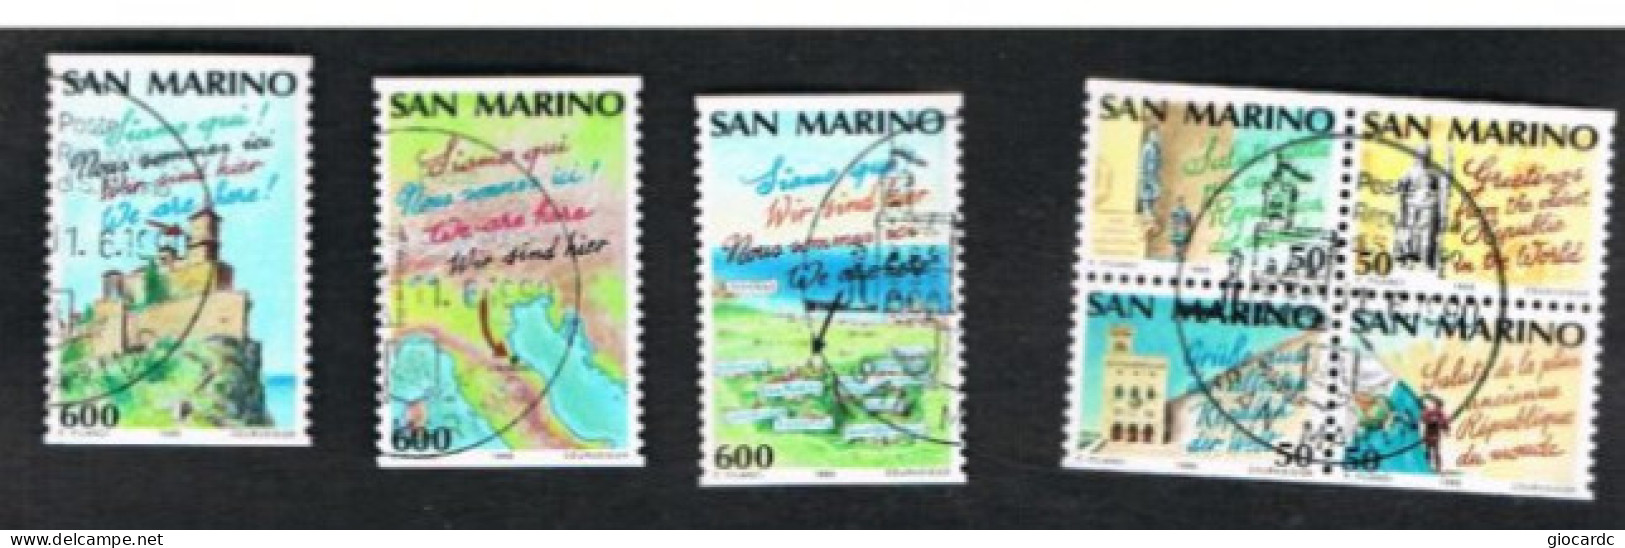 SAN MARINO UN 1289.1295  - 1990 ANNO DEL TURISMO (COMPLET SET OF 7 STAMPS, 4 SE-TENANT - BY BOOKLET)  - USED - Oblitérés